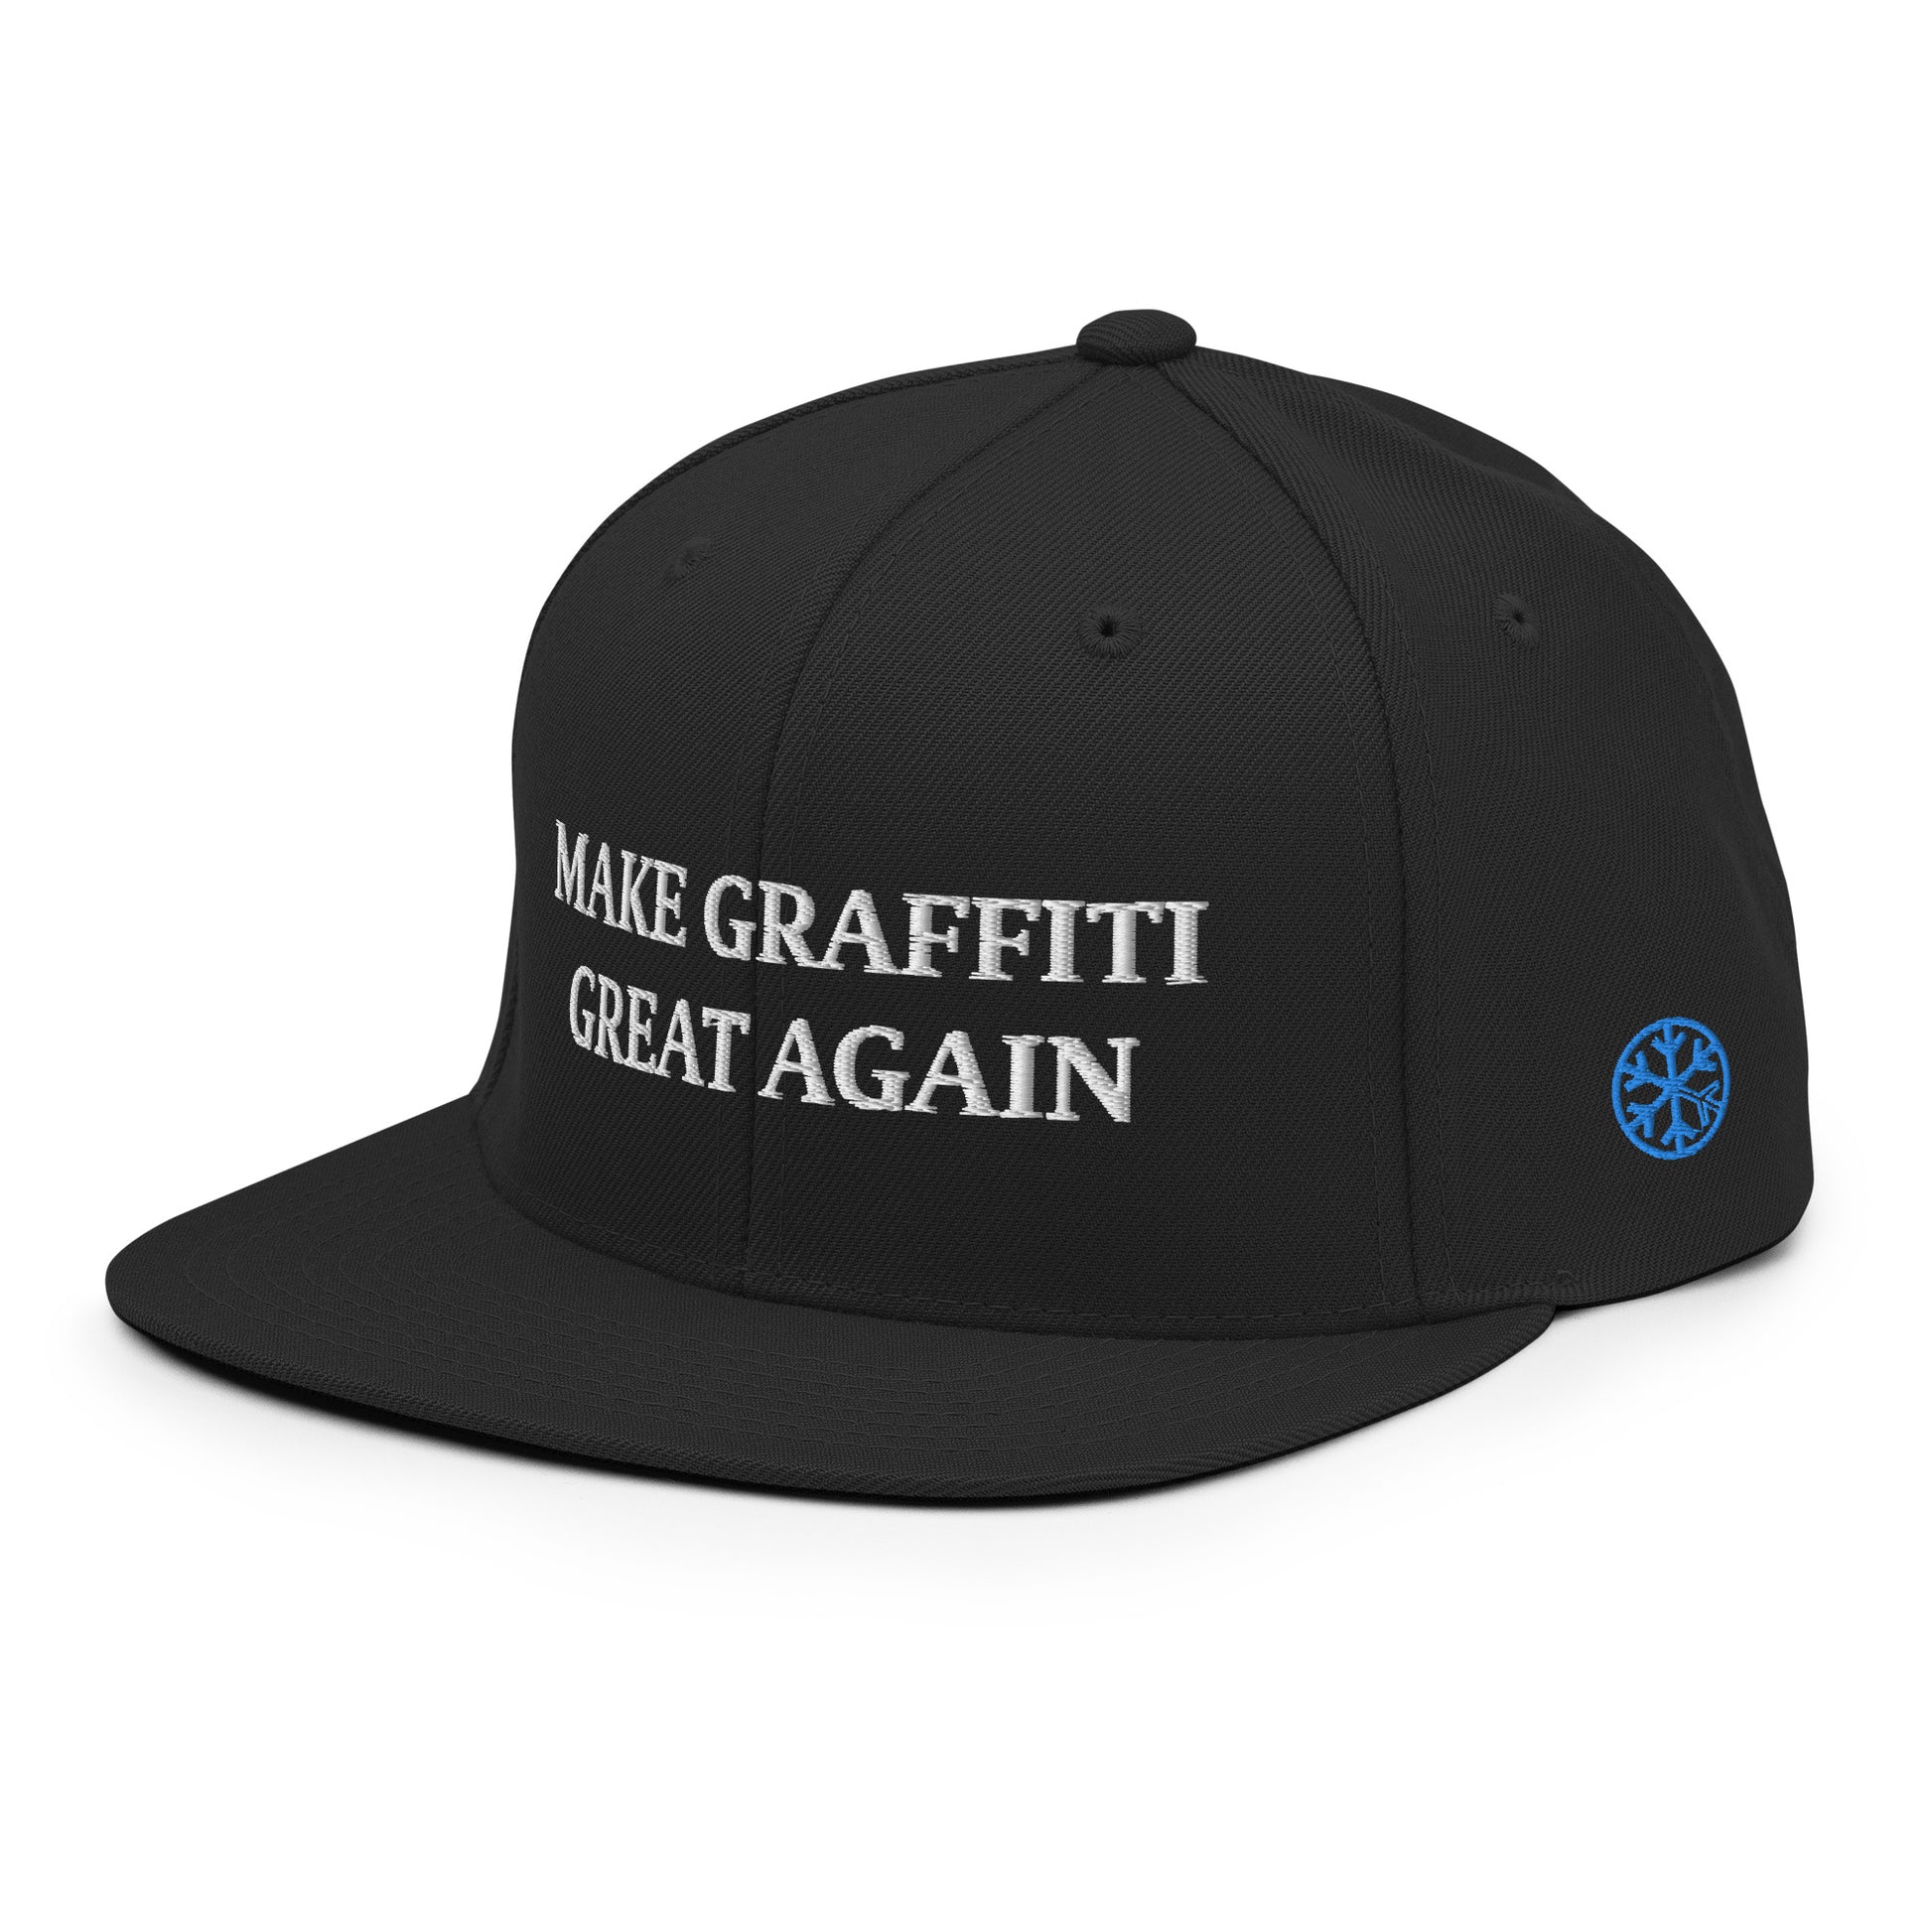 3/4 of make graffiti great again snapback black by b.different clothing graffiti and street art inspired streetwear brand for weirdos, misfits, and outcasts.